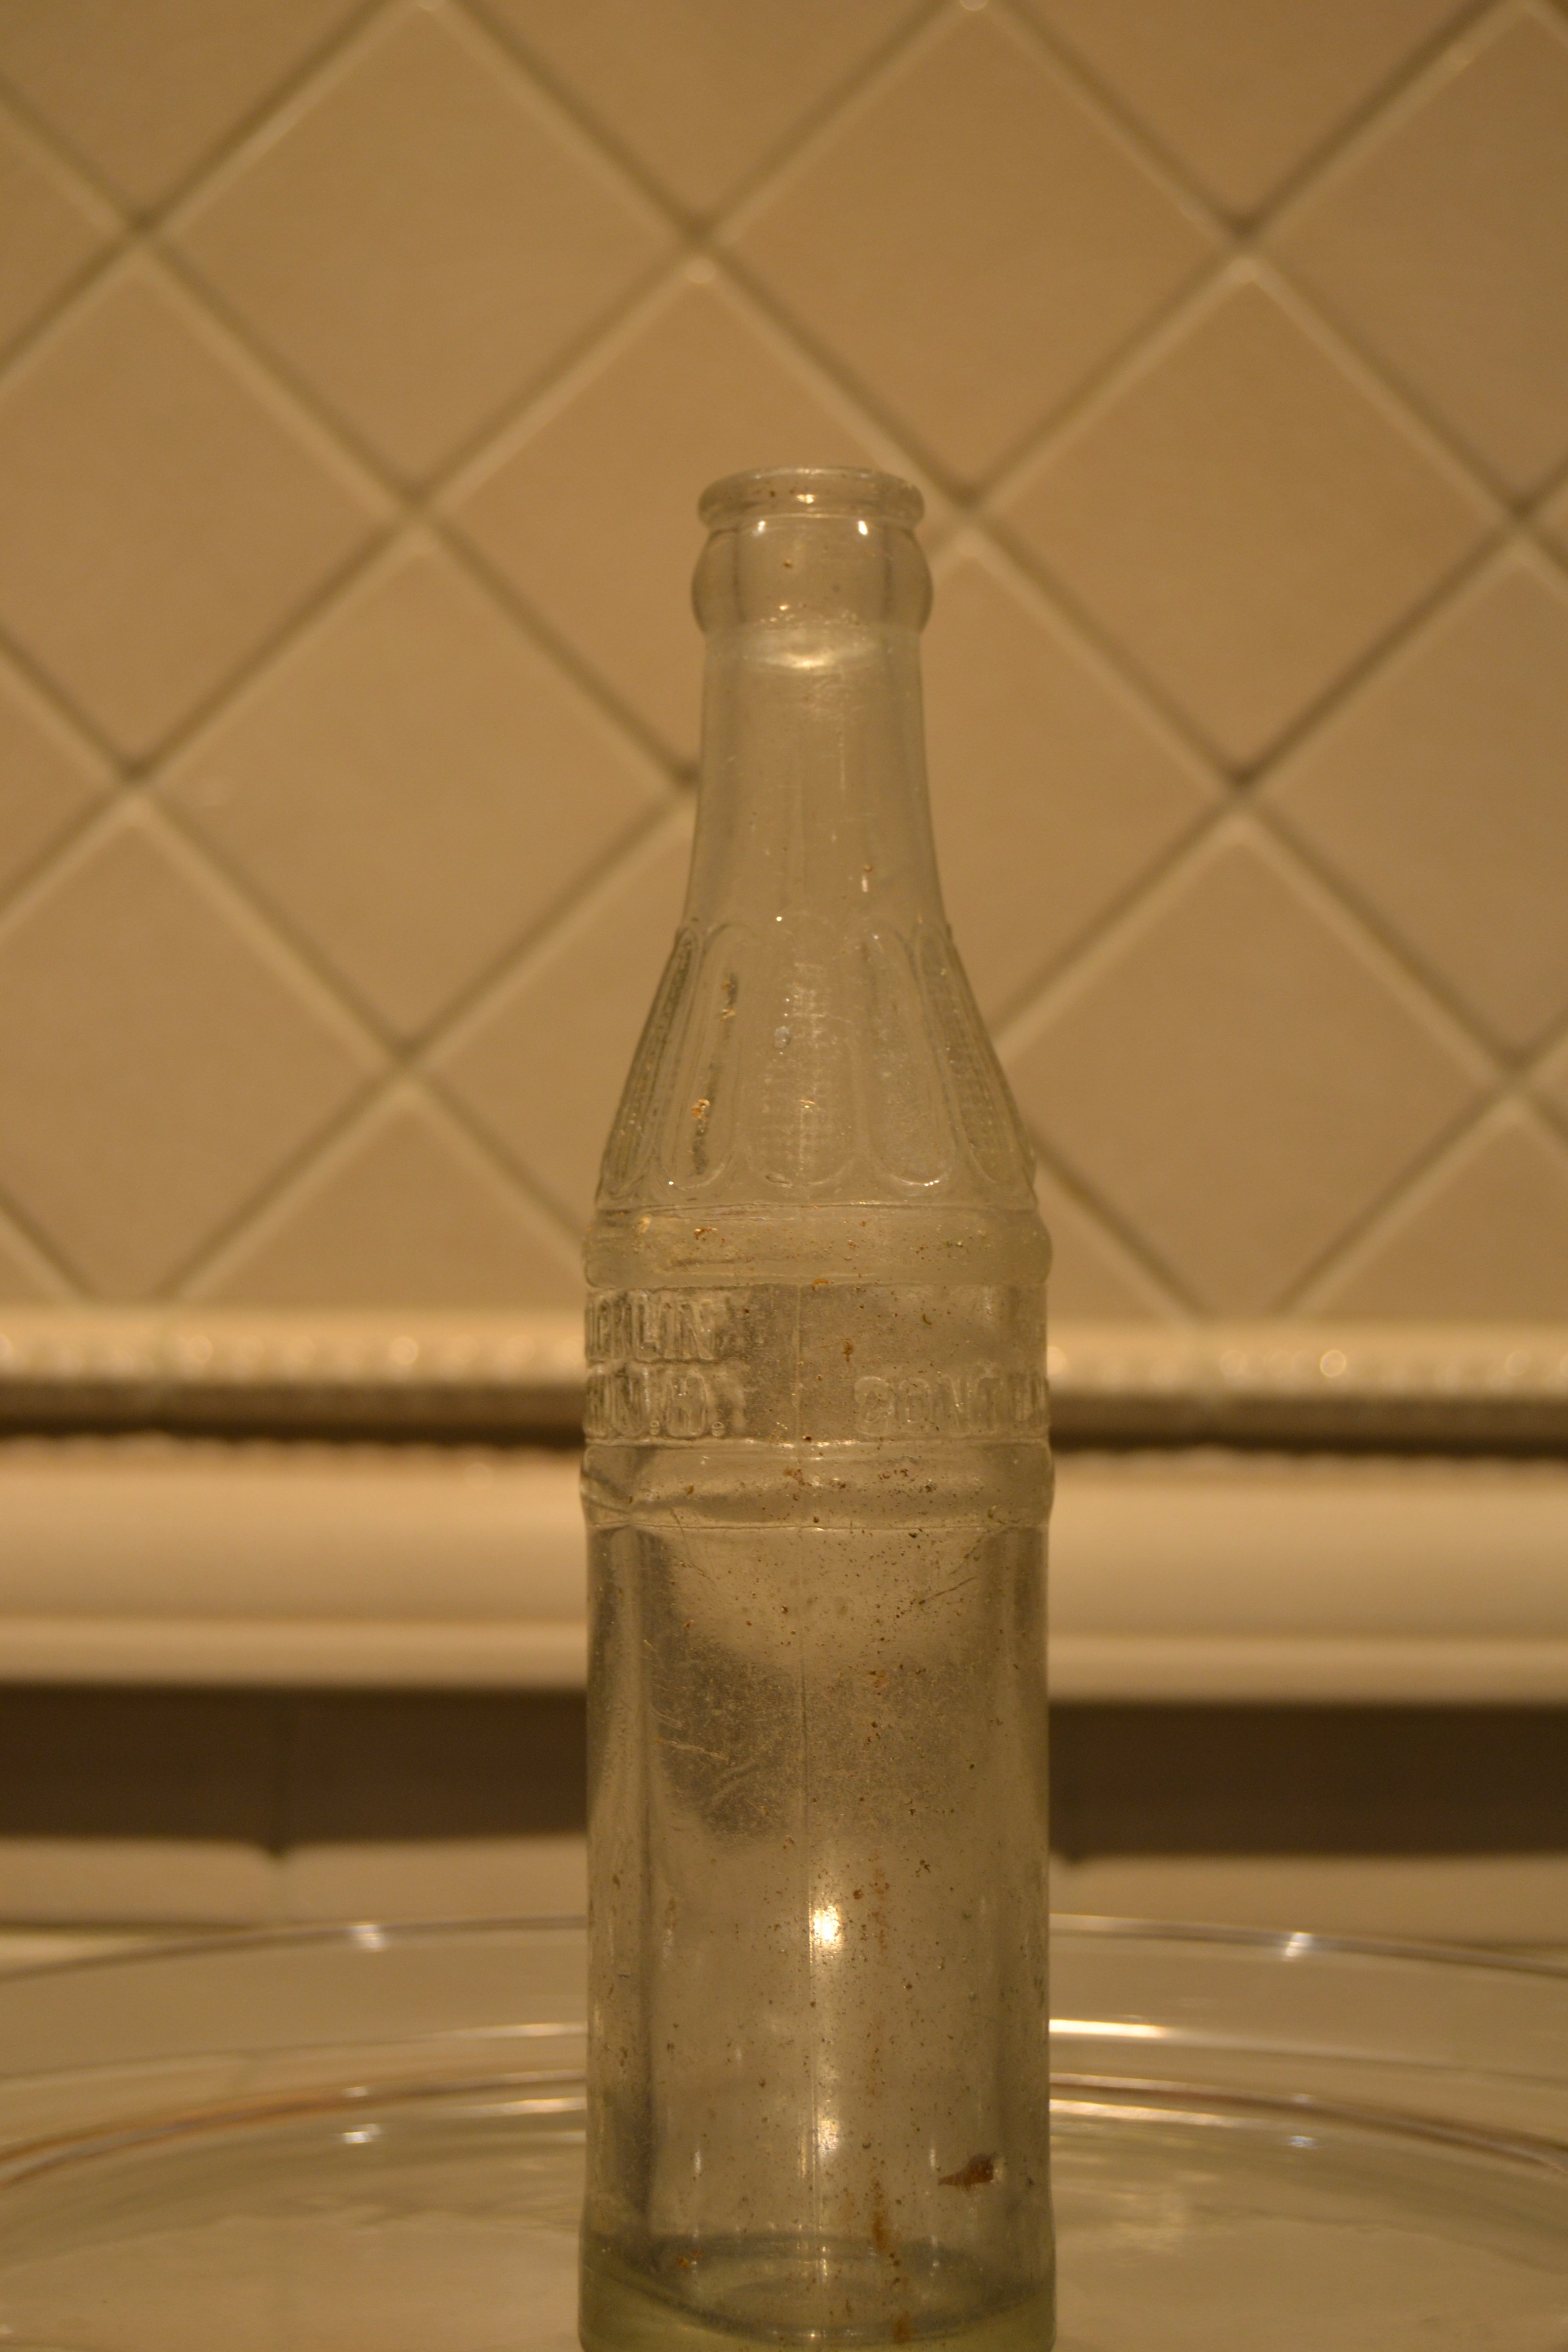 Antique Thomas Loughlin Portsmouth, NH Ale Bottle (C. 1900) For Sale! (+ Shipping & Handling) 2